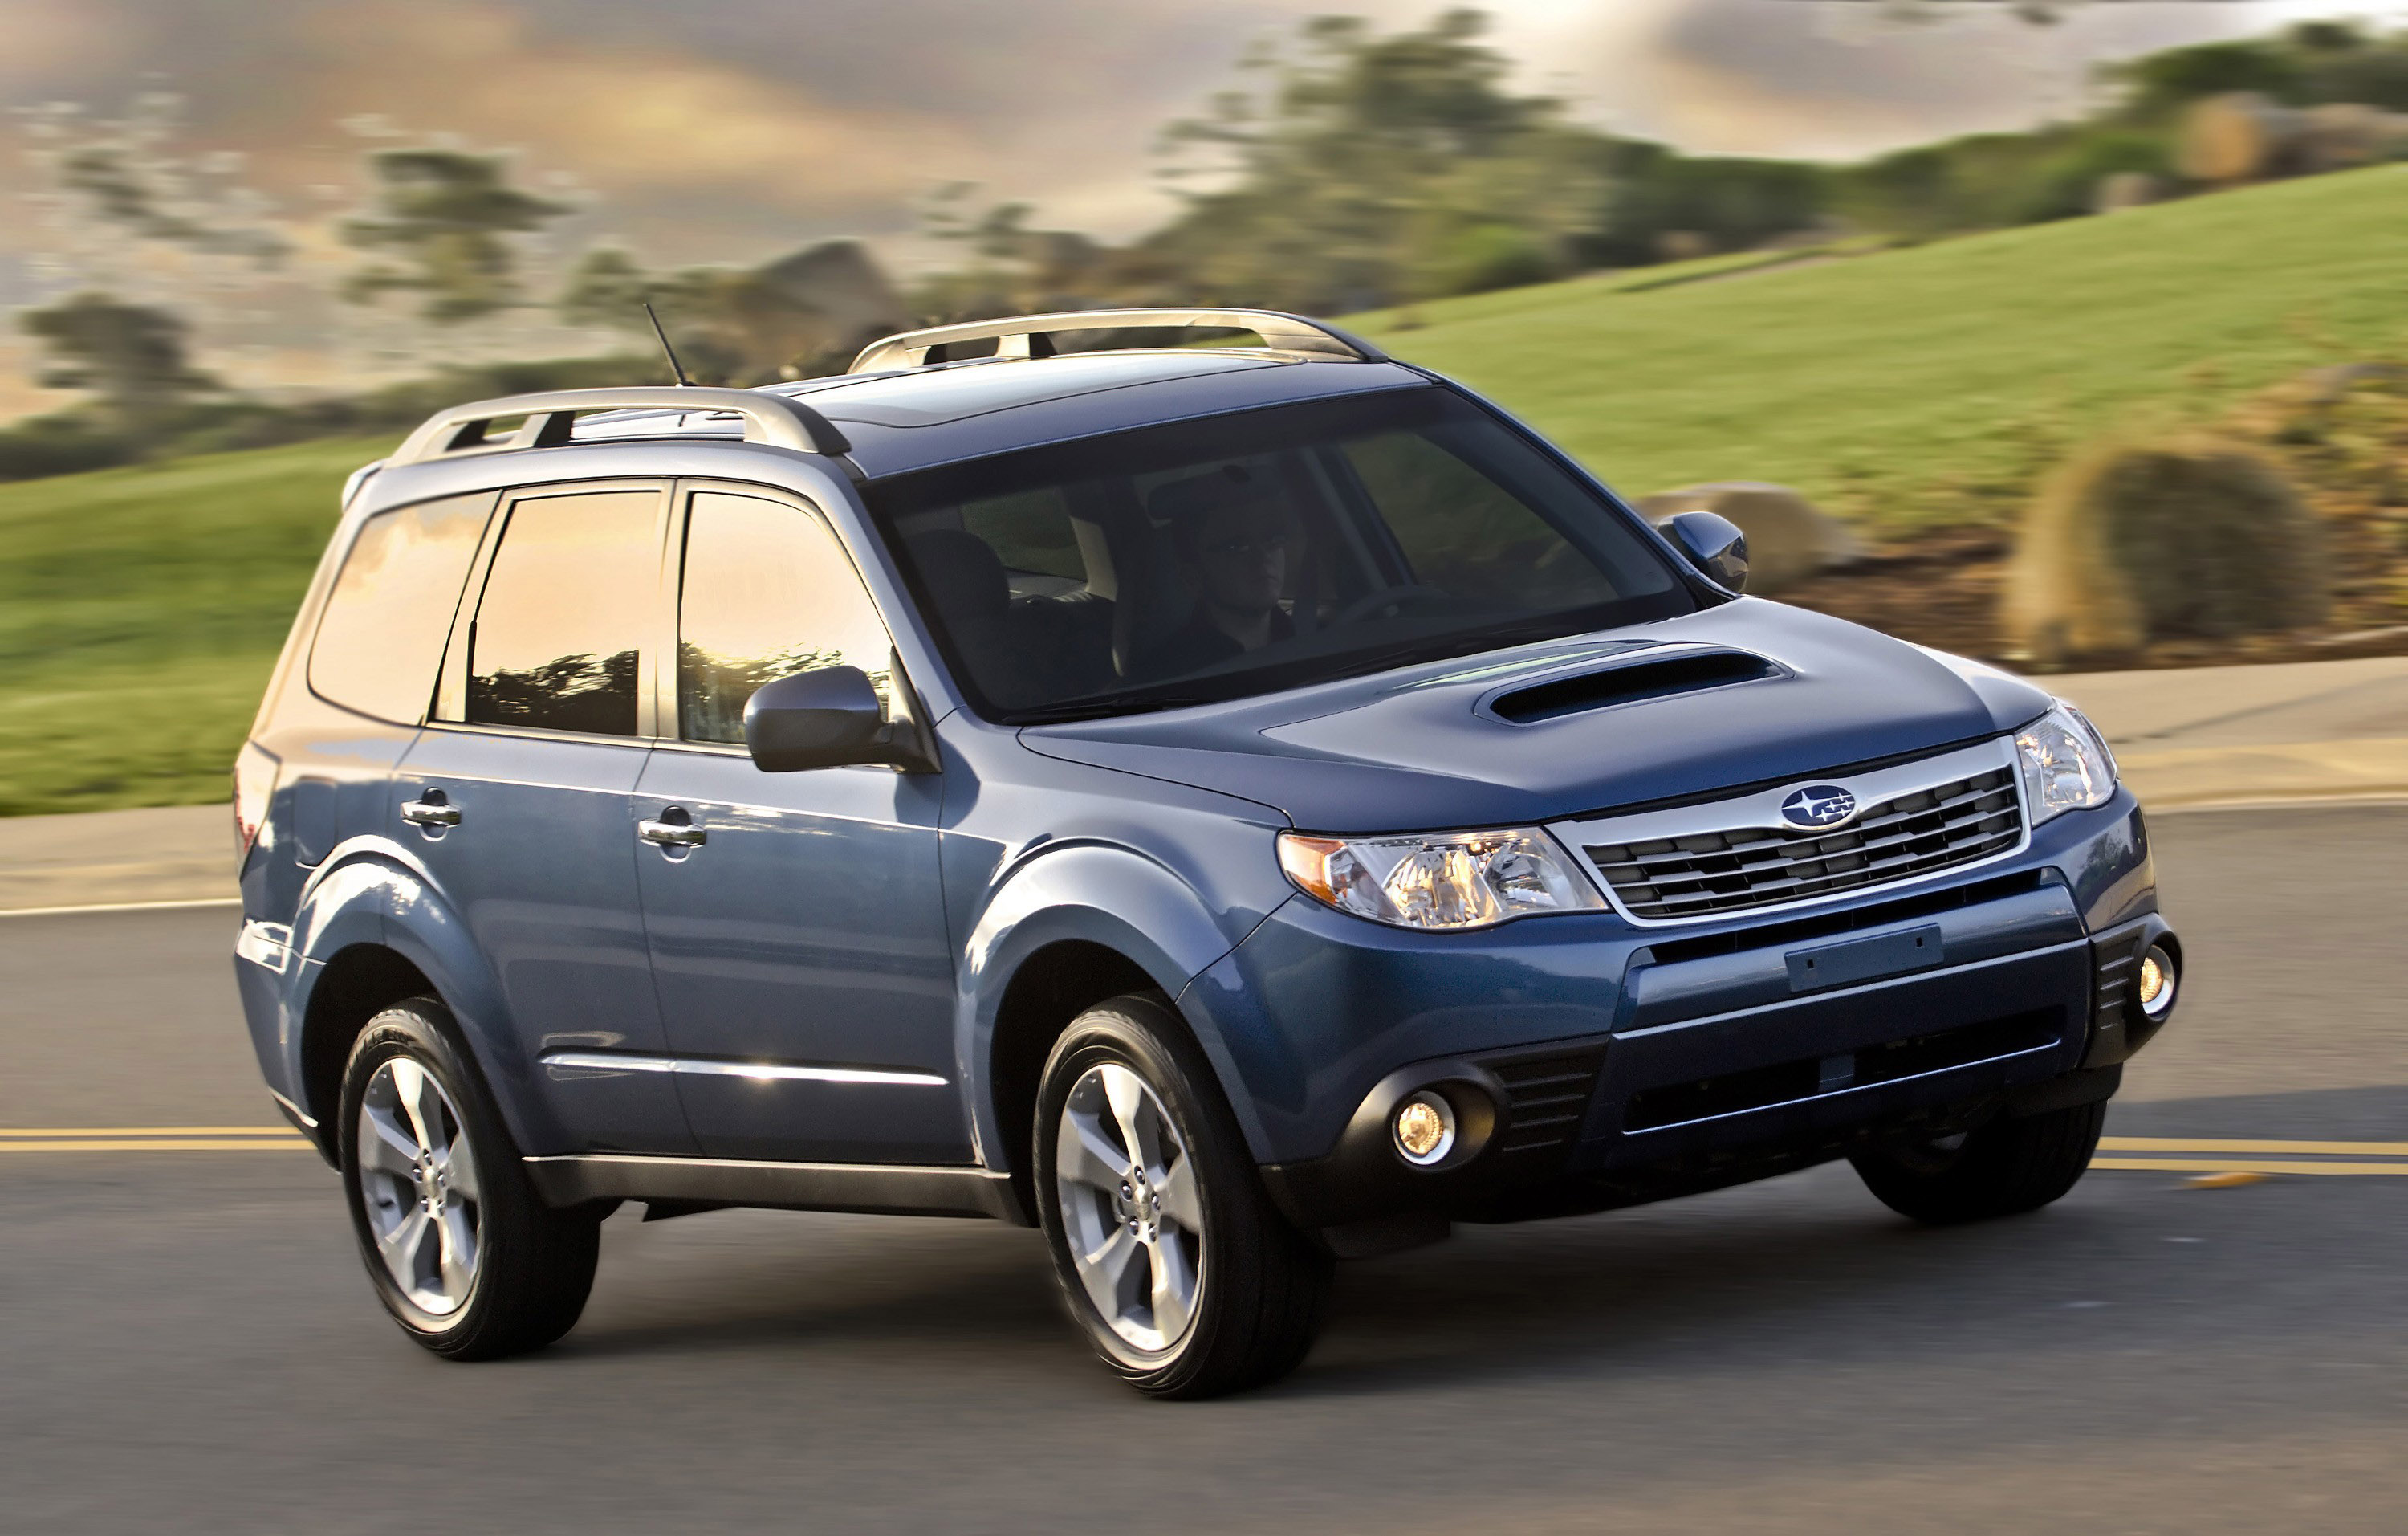 Subaru adds more trim levels to 2010 Forester lineup